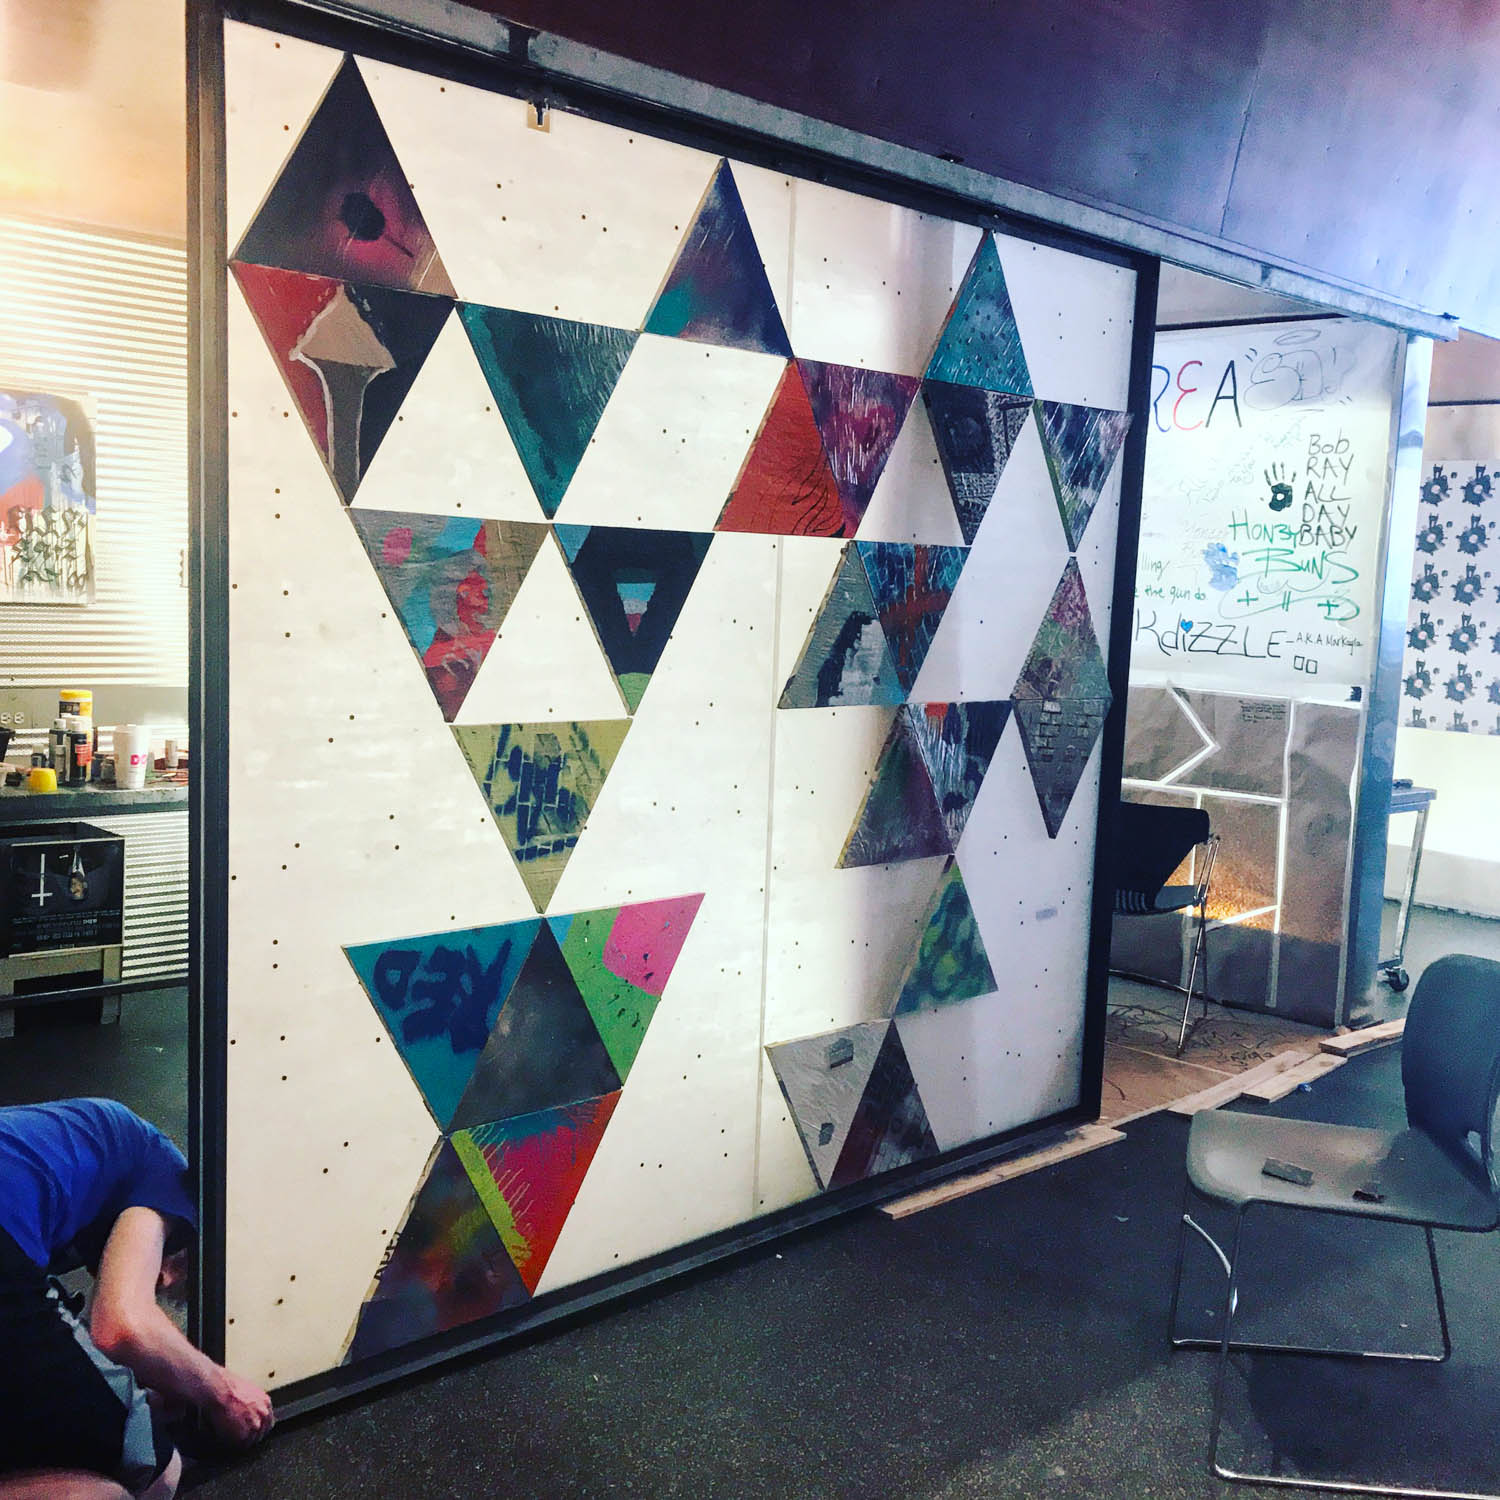 A movable triangular barn door gird for Elementz by student Jake Gianni.